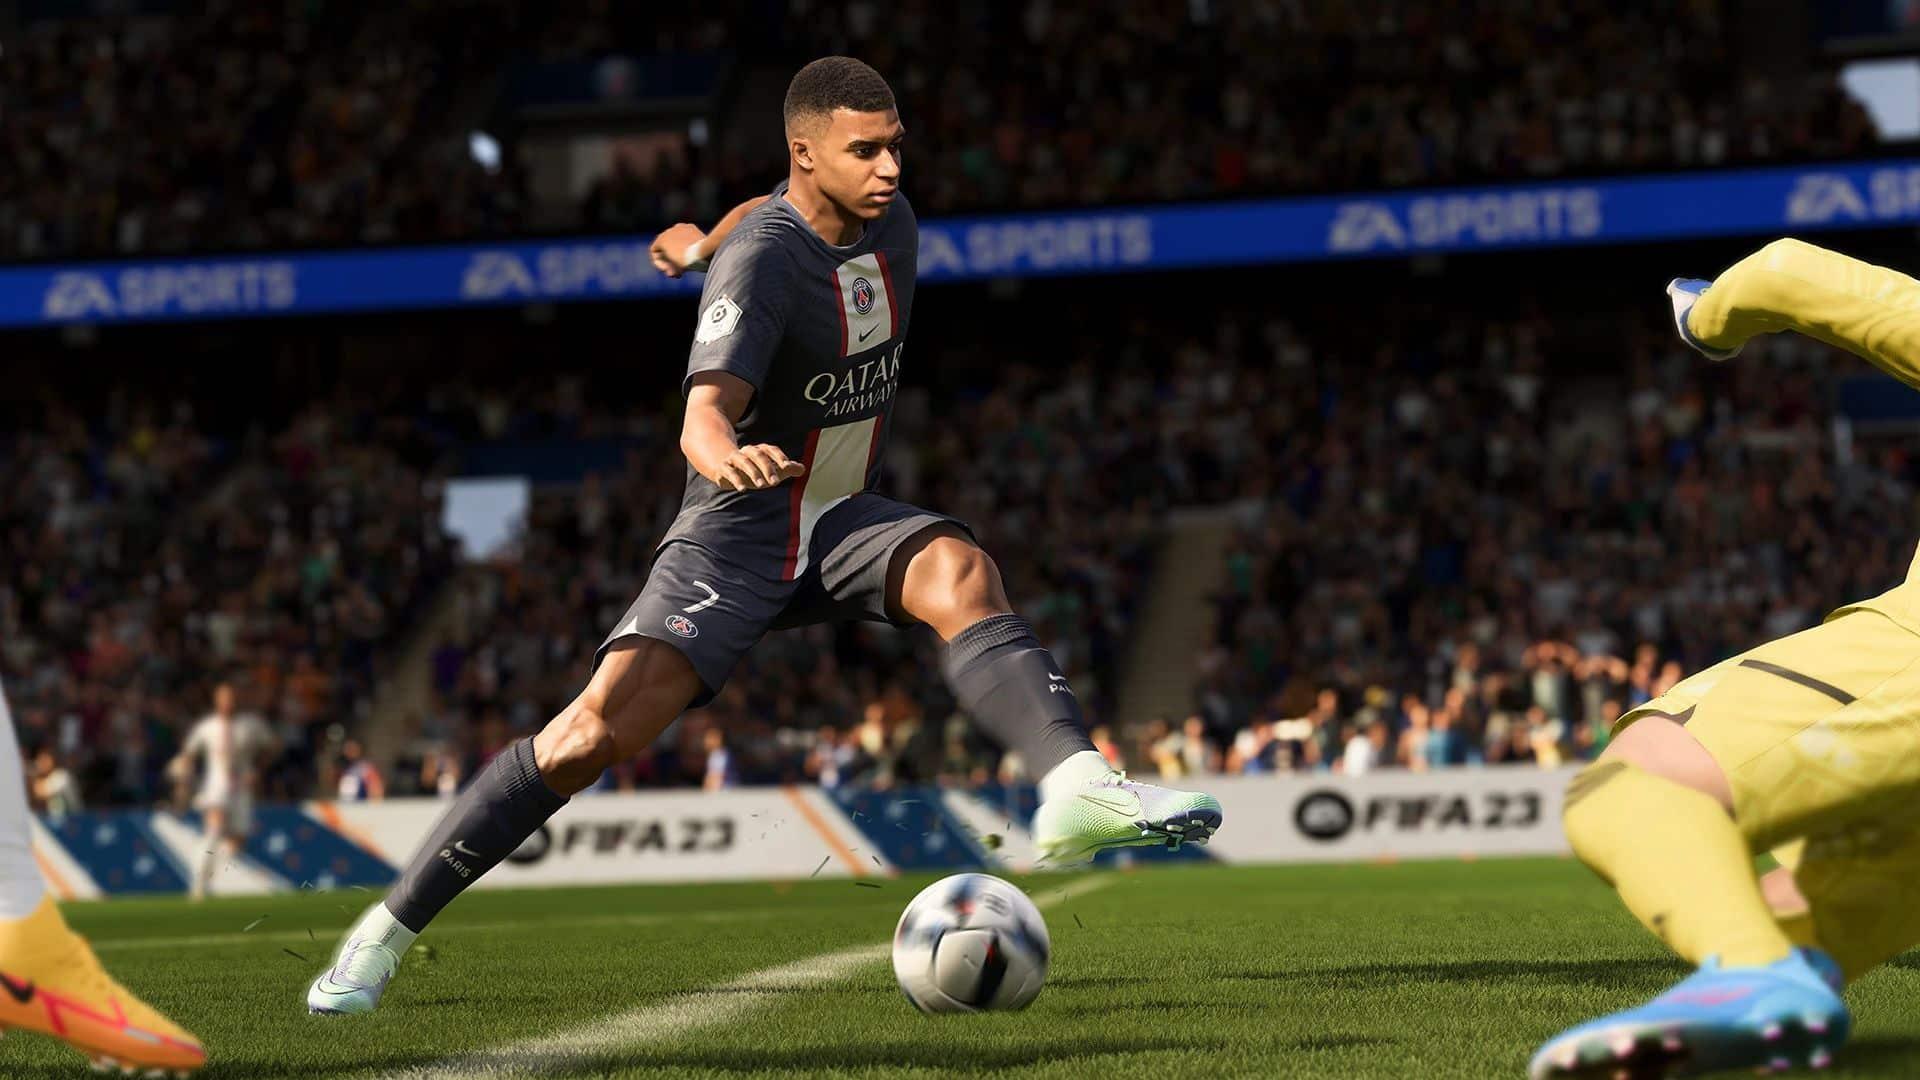 I believe FIFA 23 is confirmed next gen for PC with the 70 dollar